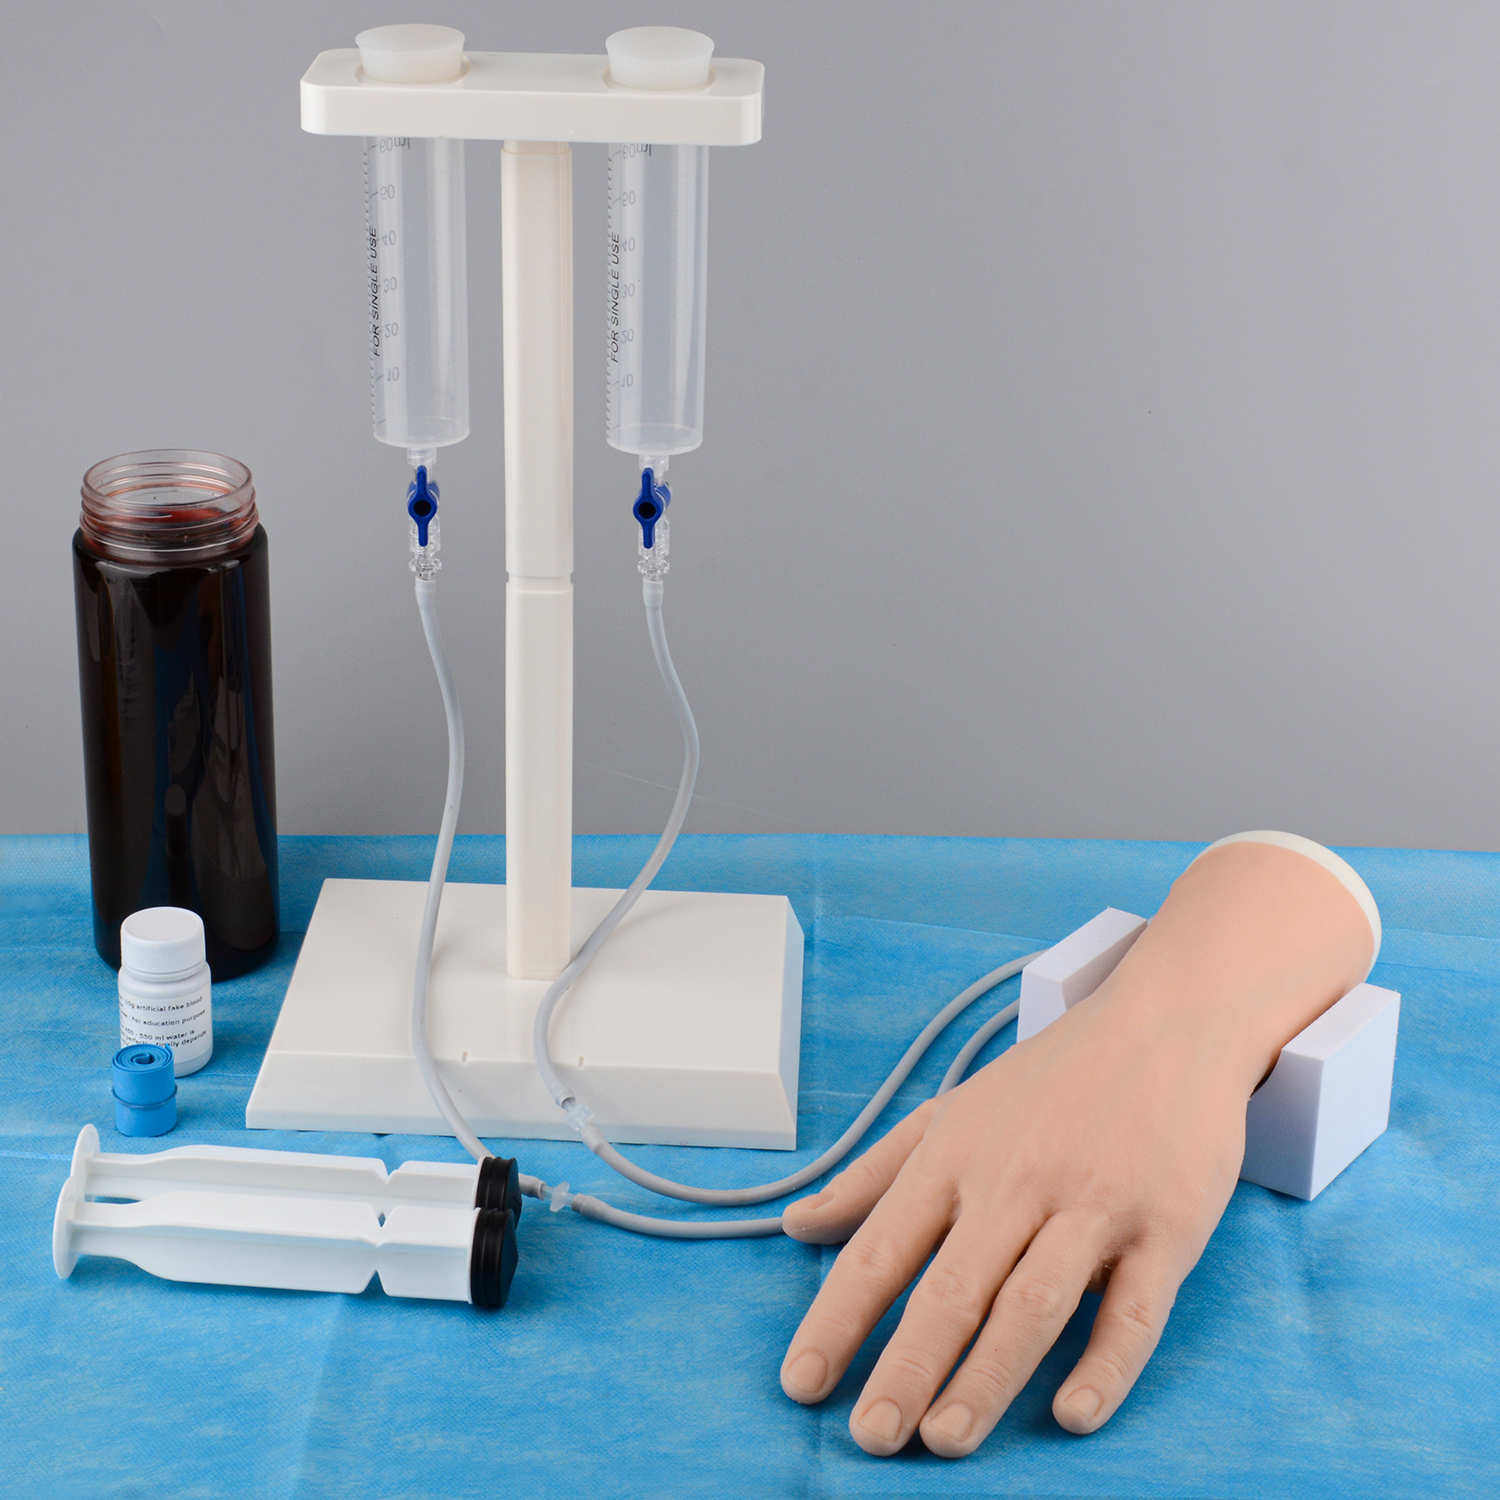 Advanced IV Infusion Injection Training Hand Model and Kit